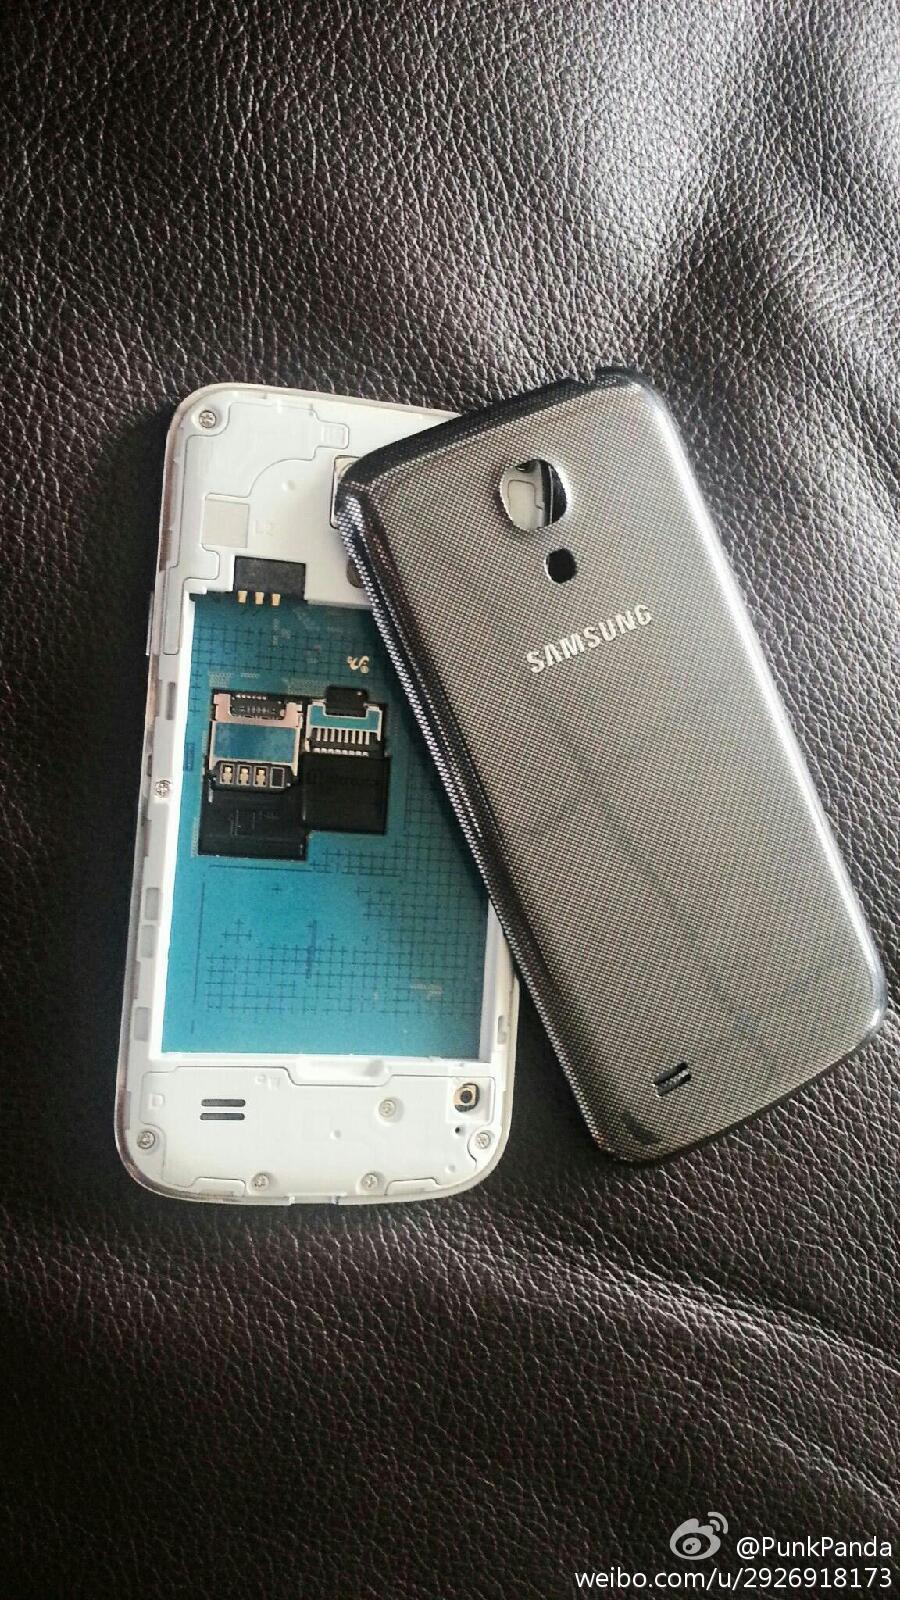 Samsung-Galaxy-S4-mini-leaks-out-in-perfect-clarity (5)